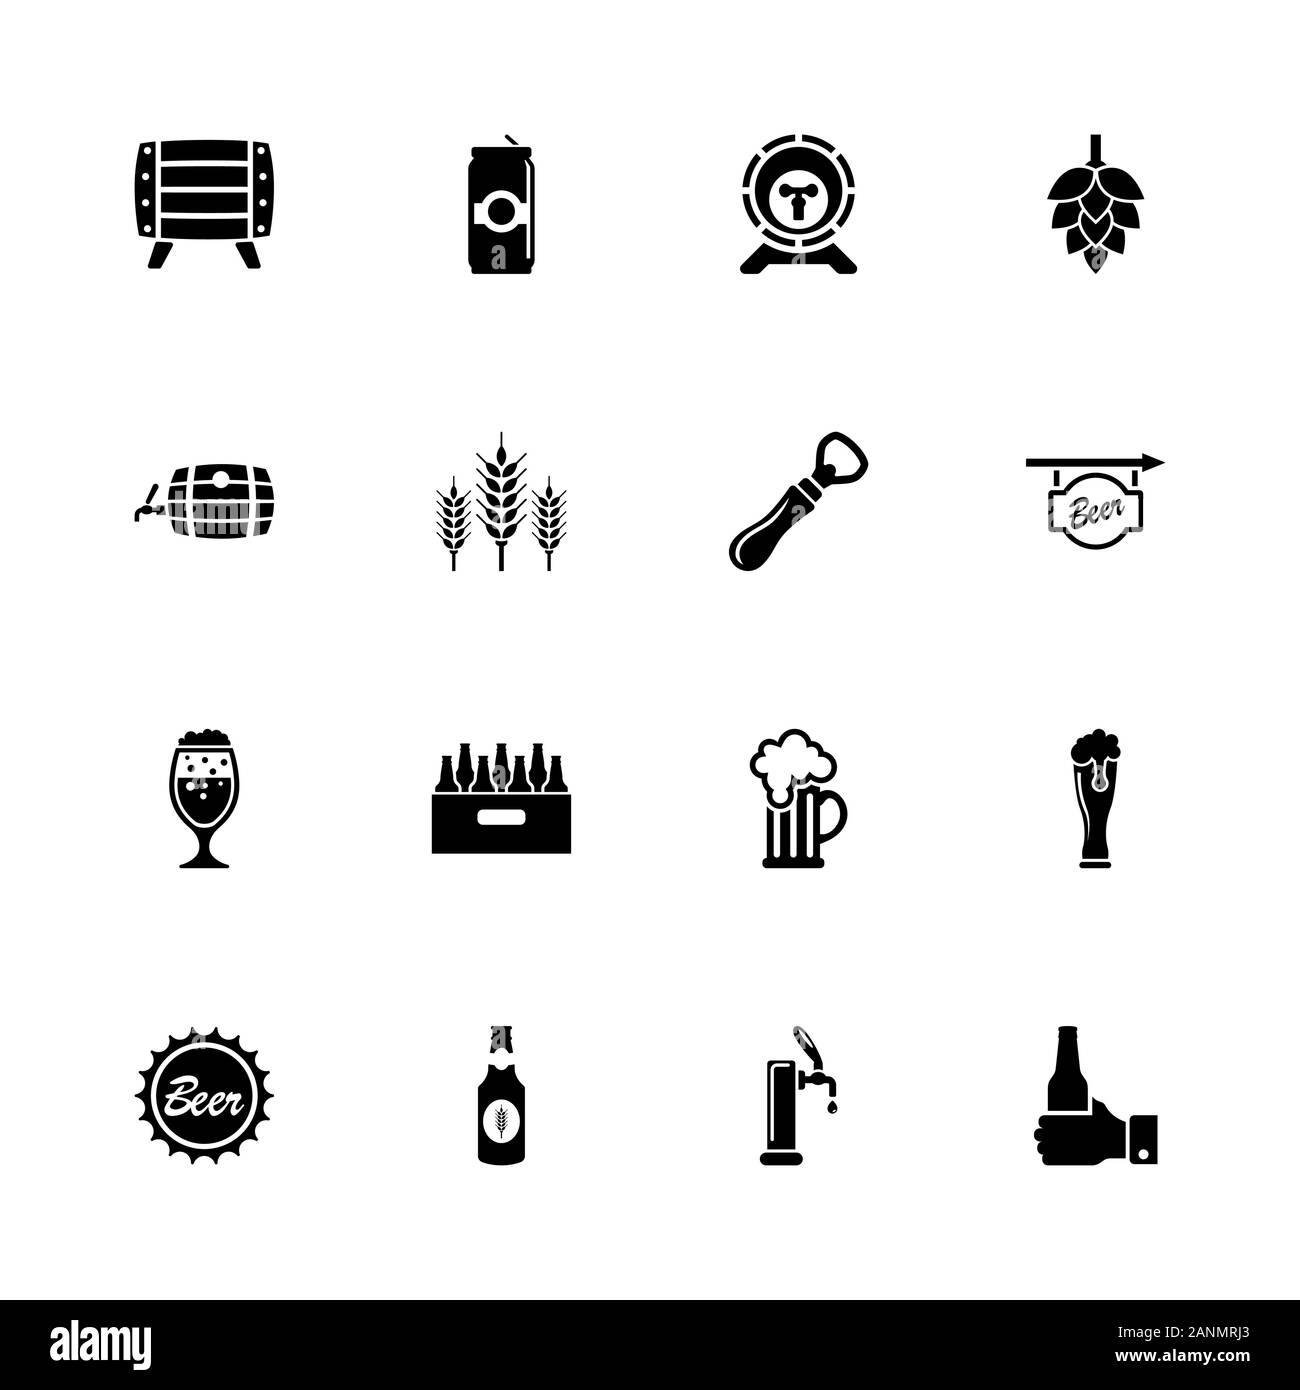 Beer icons - Expand to any size - Change to any colour. Flat Vector Icons - Black Illustration on White Background. Stock Vector